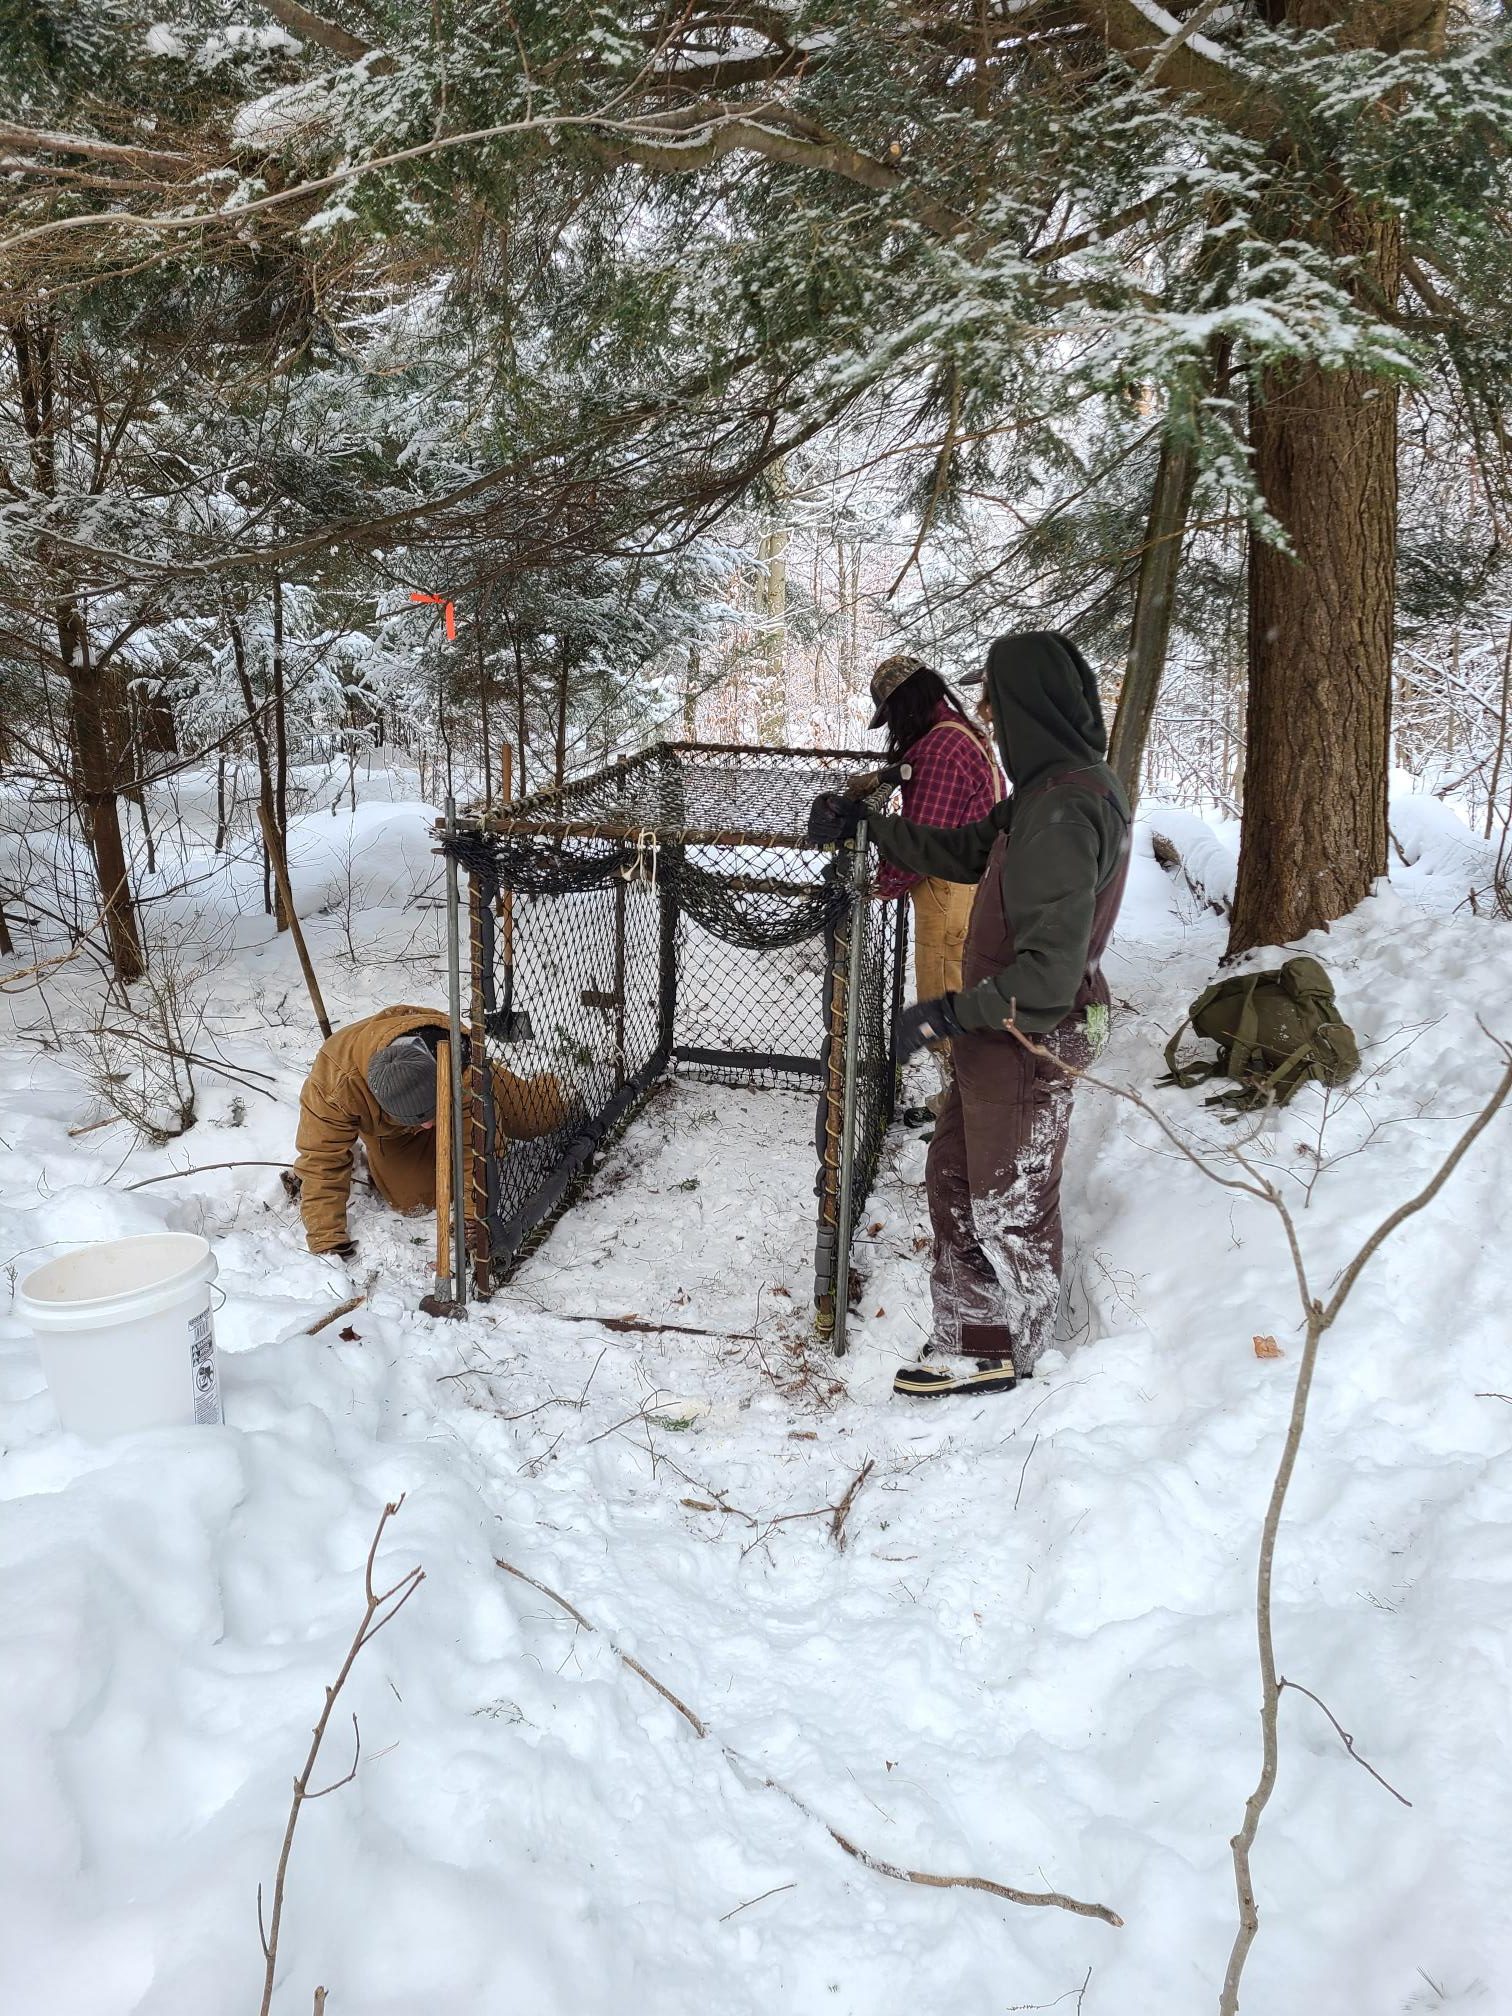 staking down a Clover trap in the snow under a pine tree